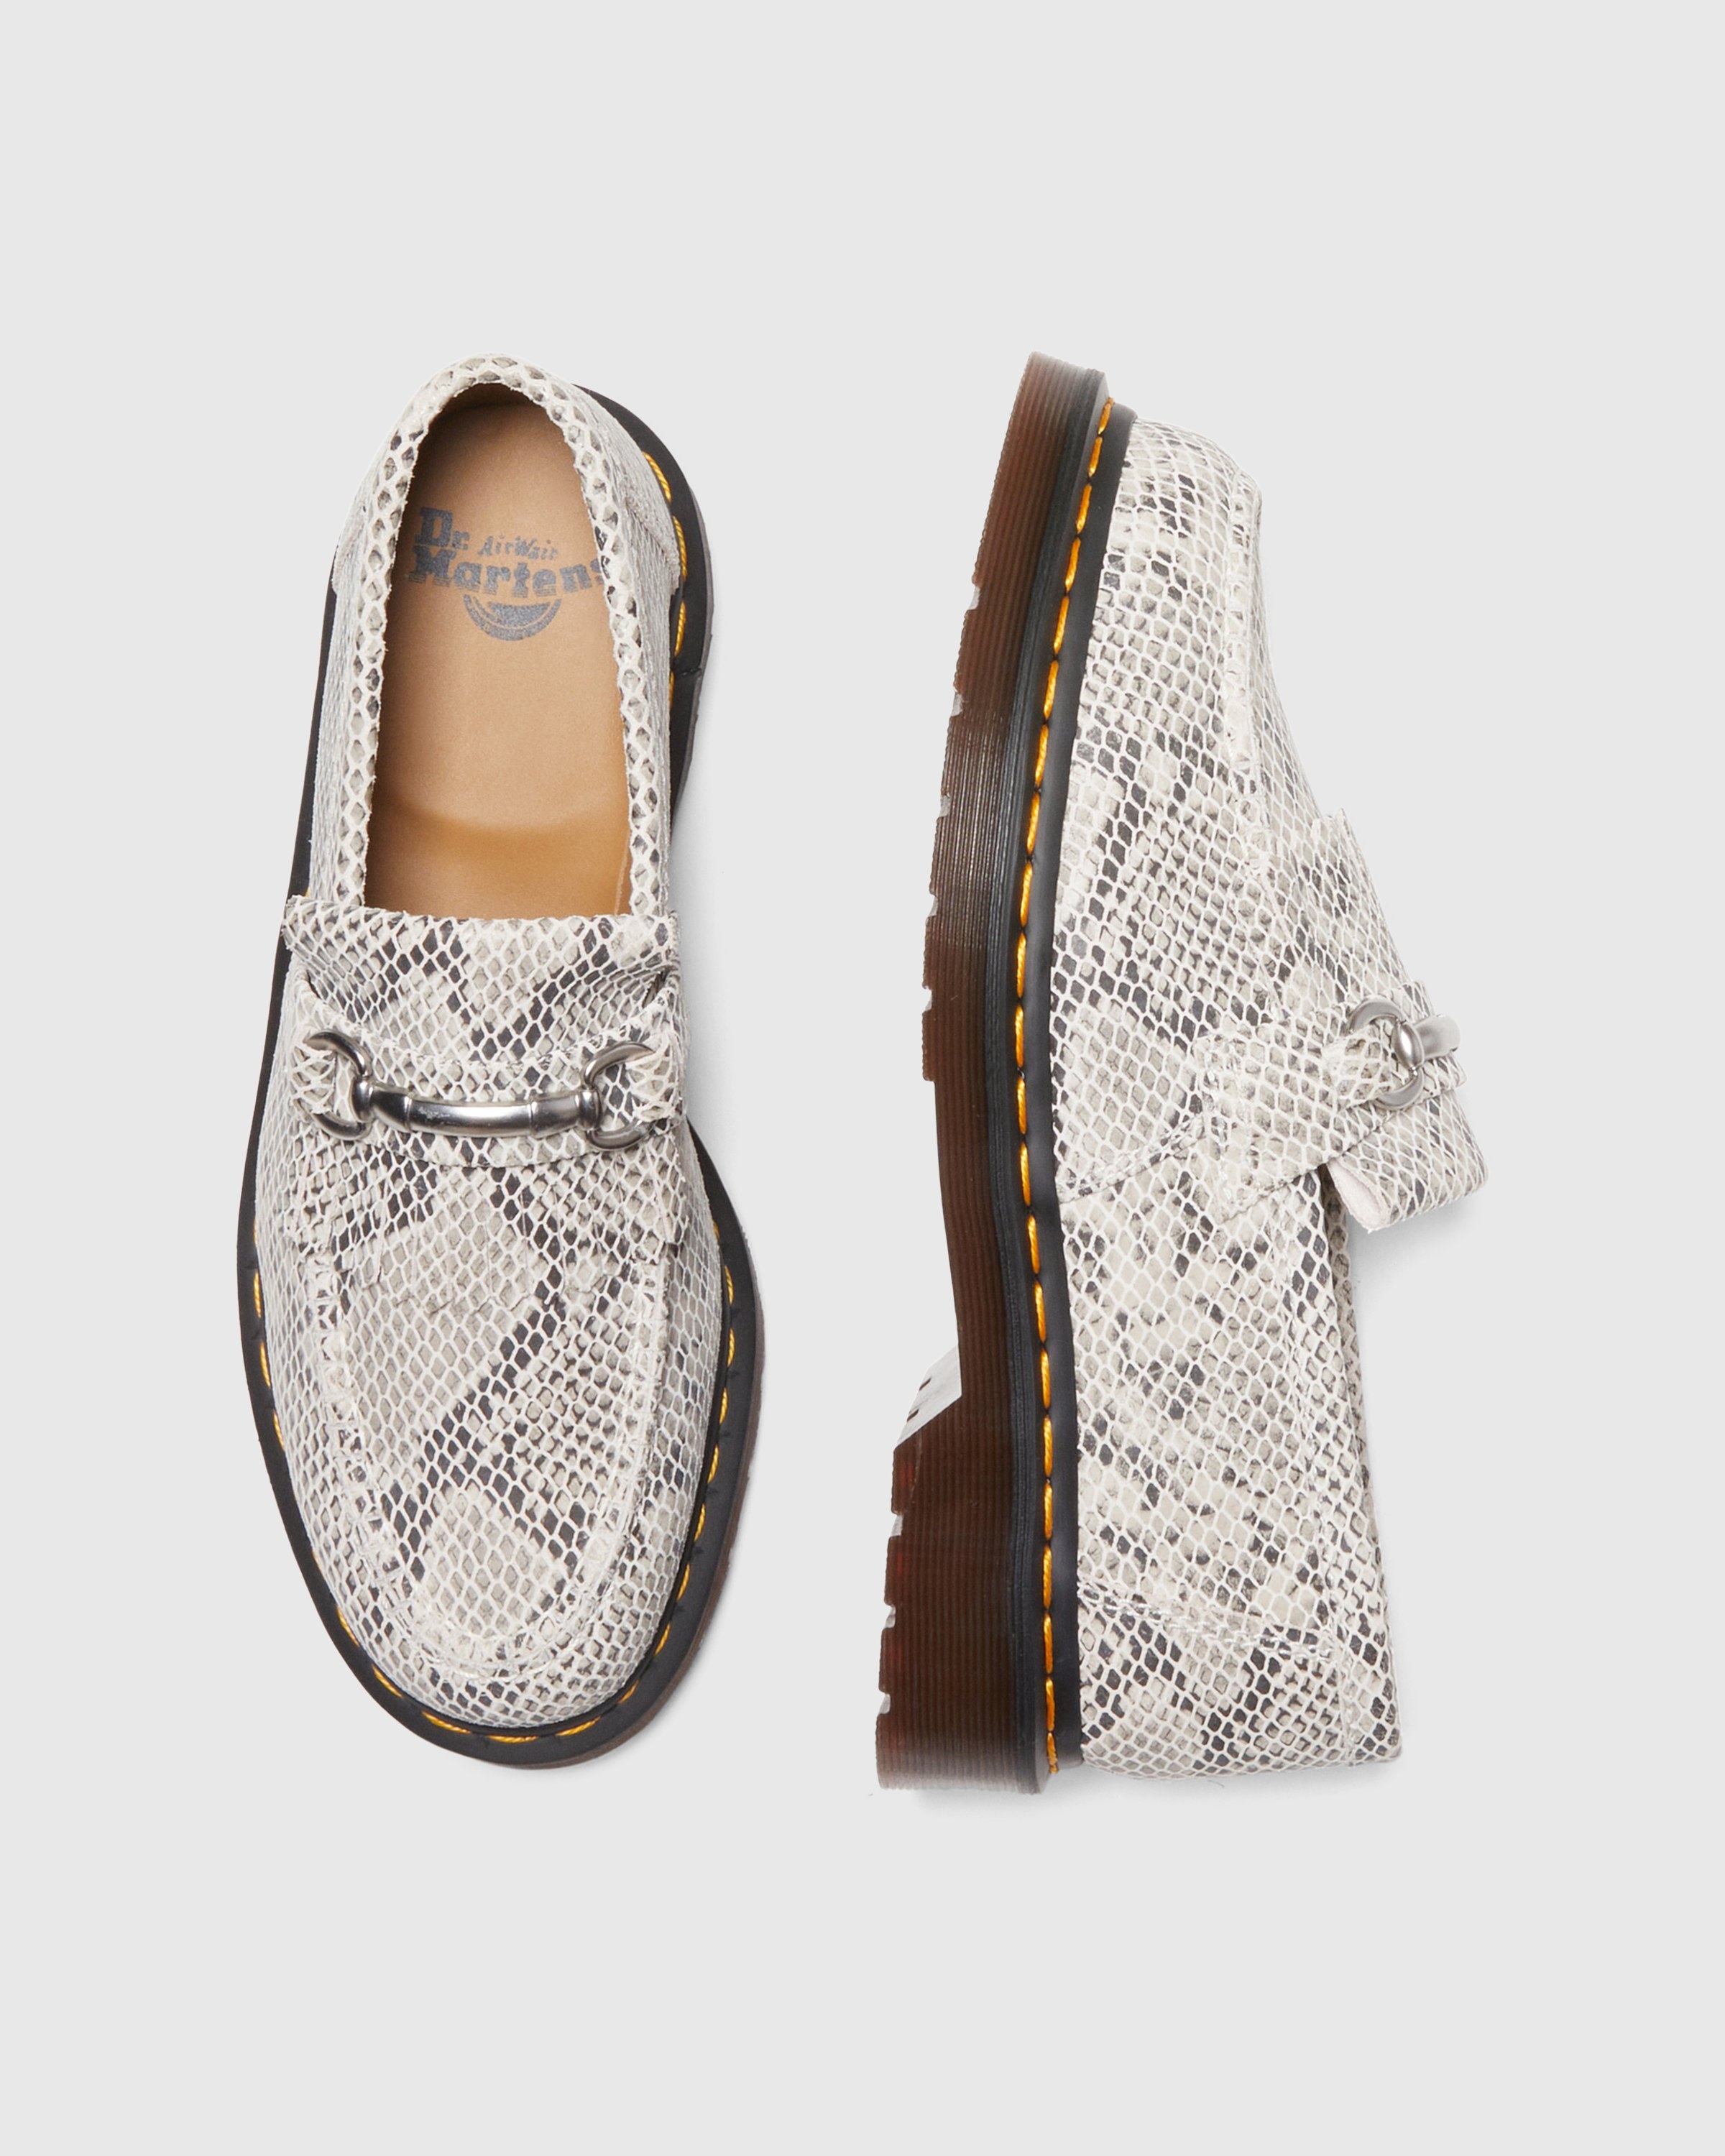 Dr. Martens – Adrian Snaffle Python Print Suede Loafers Sand/Black - Shoes - Grey - Image 4